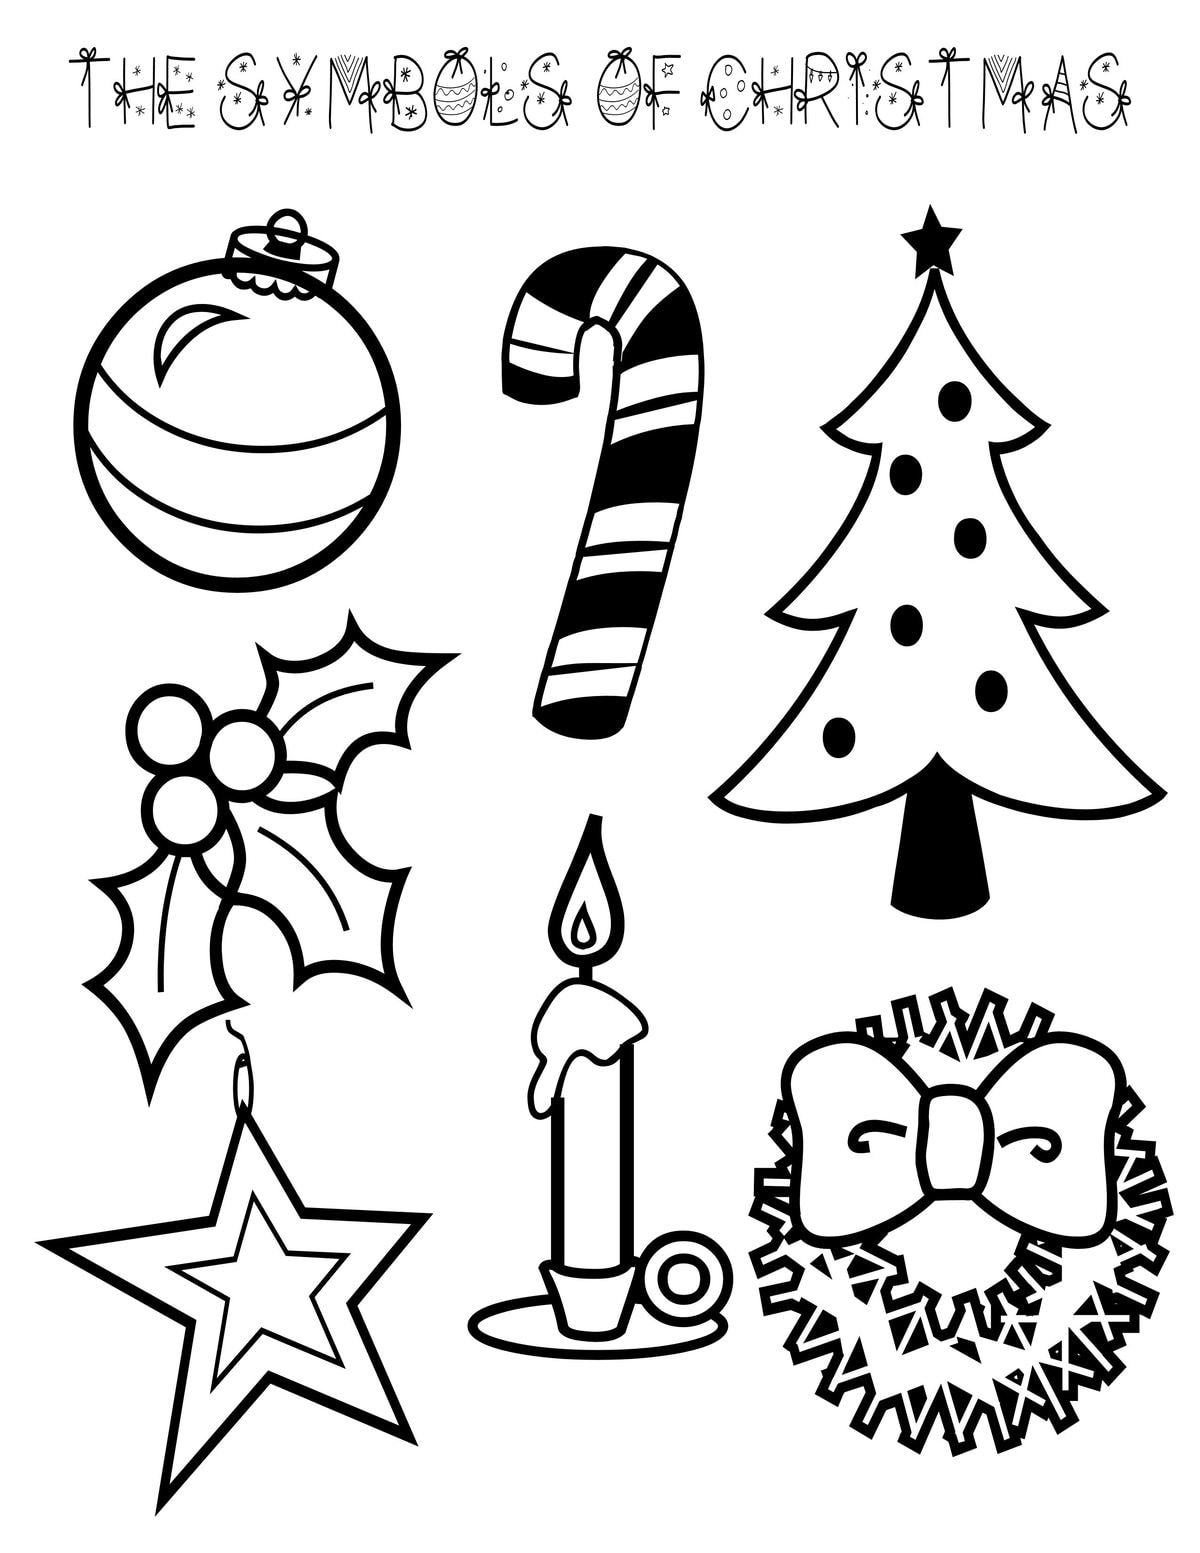 The Symbols of Christmas Coloring Page - a perfect family activity this holiday season. { lilluna.com }